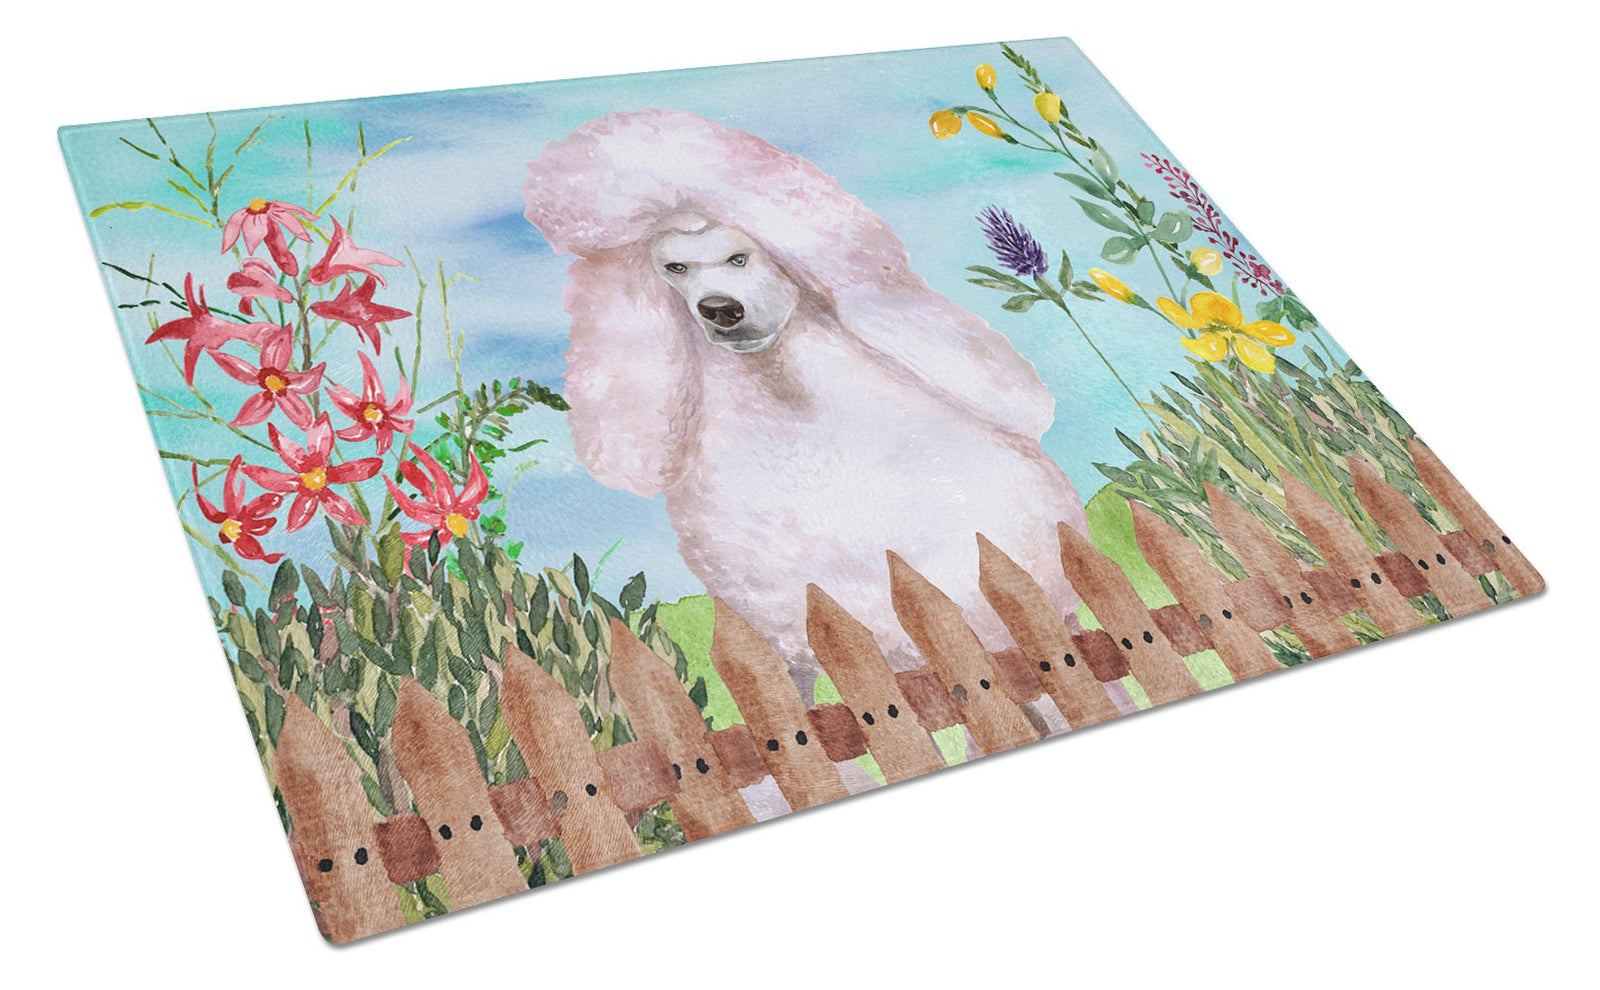 White Standard Poodle Spring Glass Cutting Board Large CK1279LCB by Caroline's Treasures